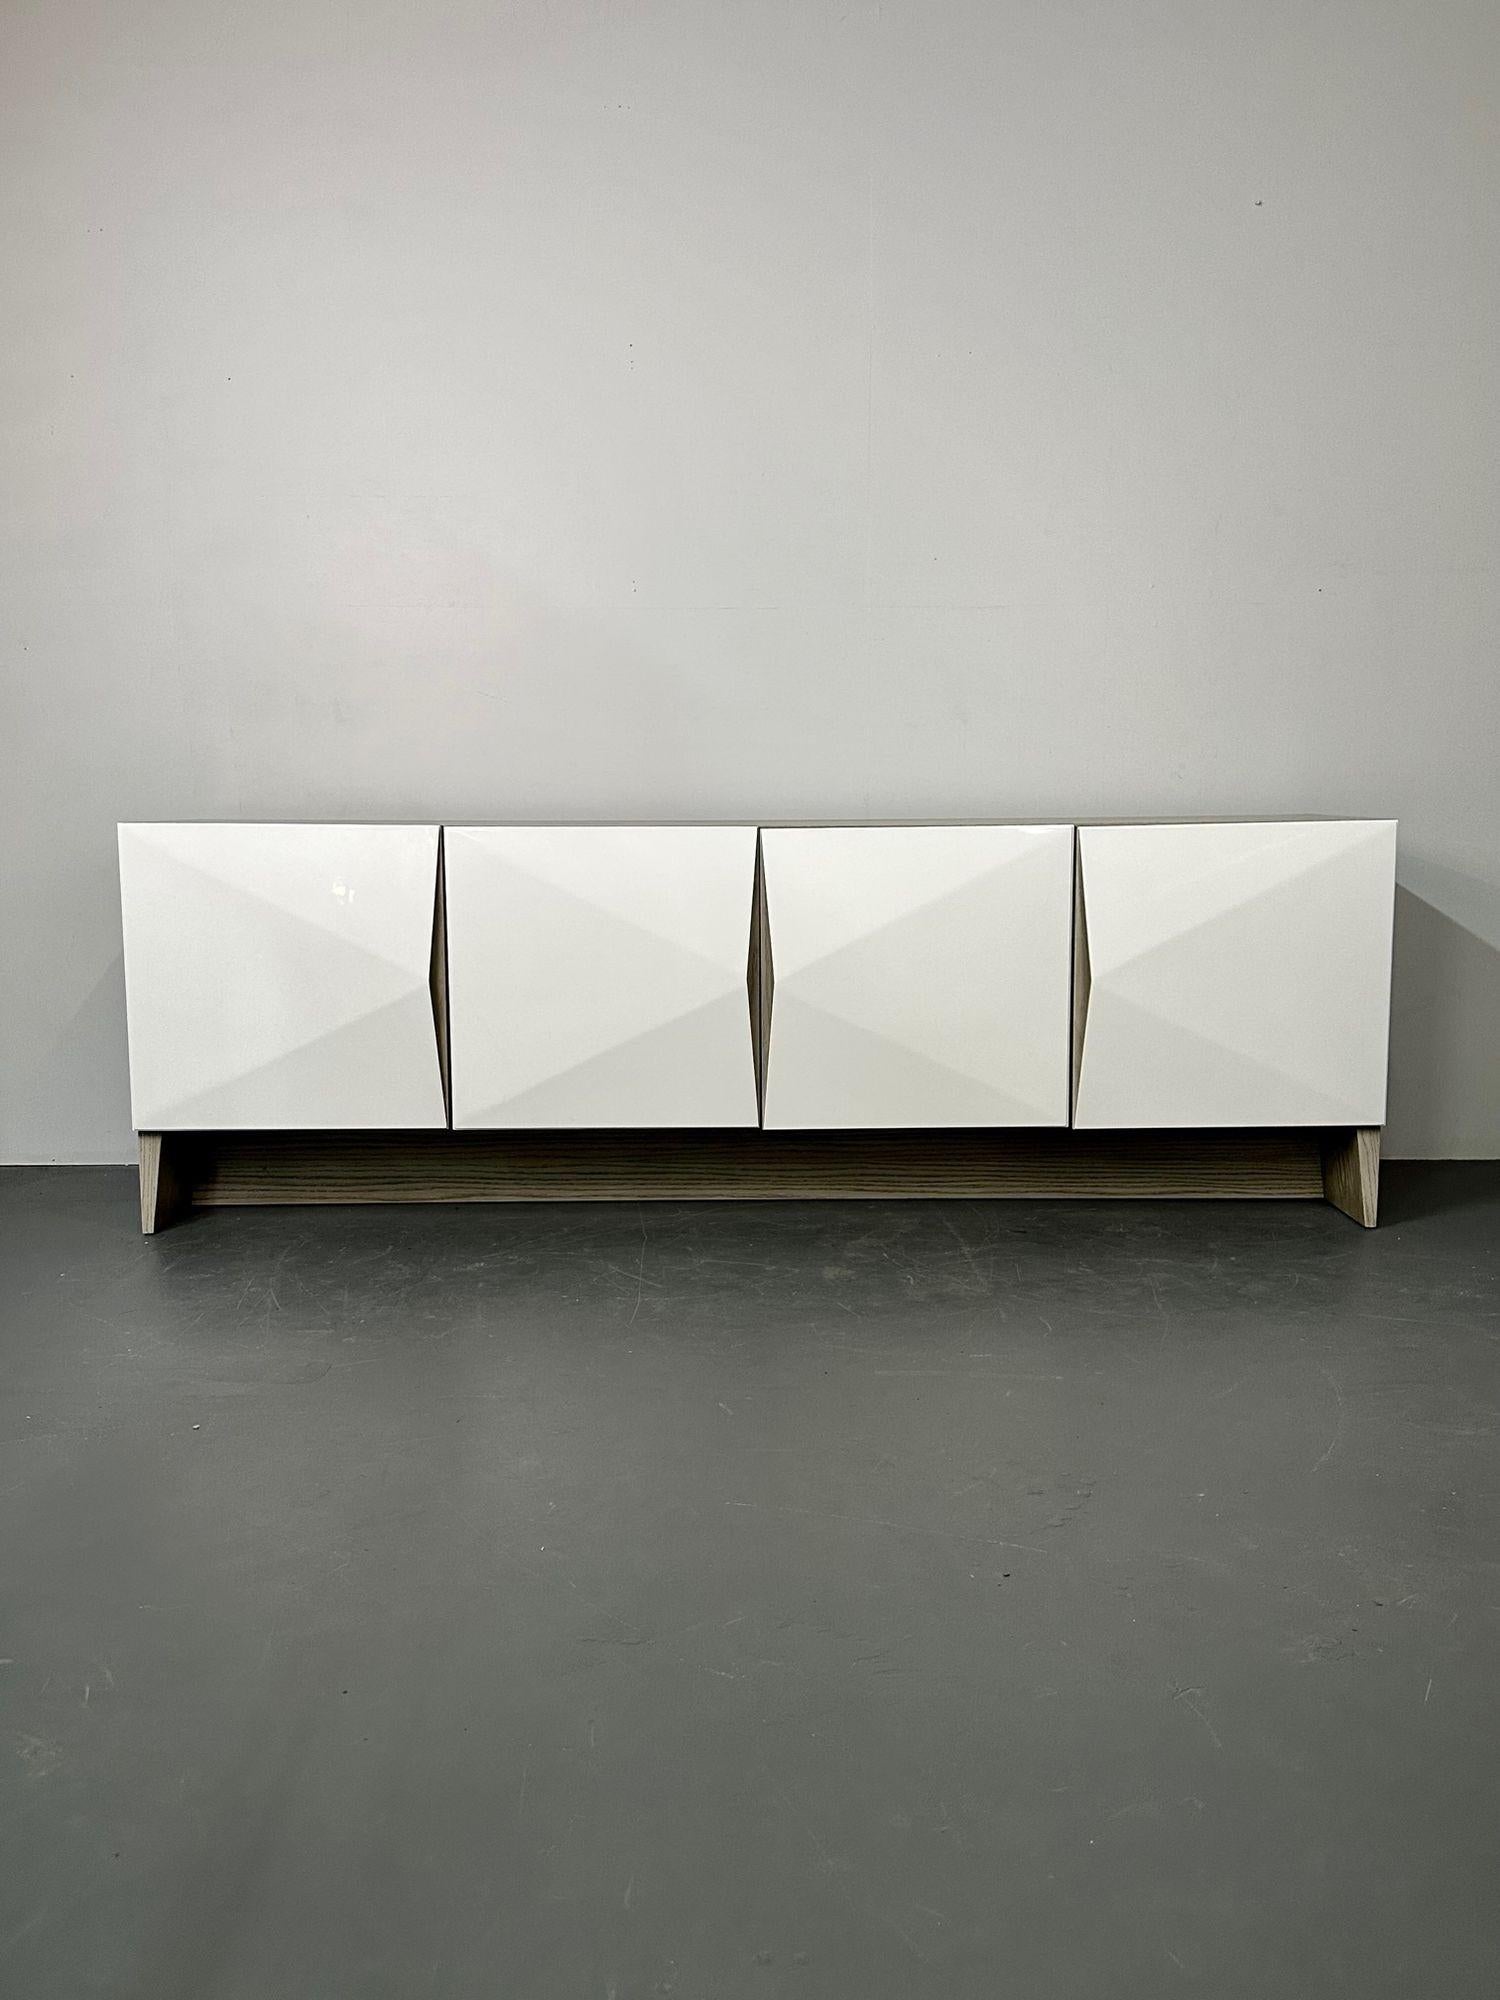 20th Century Modern Geometric Ceruse Oak Dresser, Sideboard, Cabinet, White Lacquered For Sale